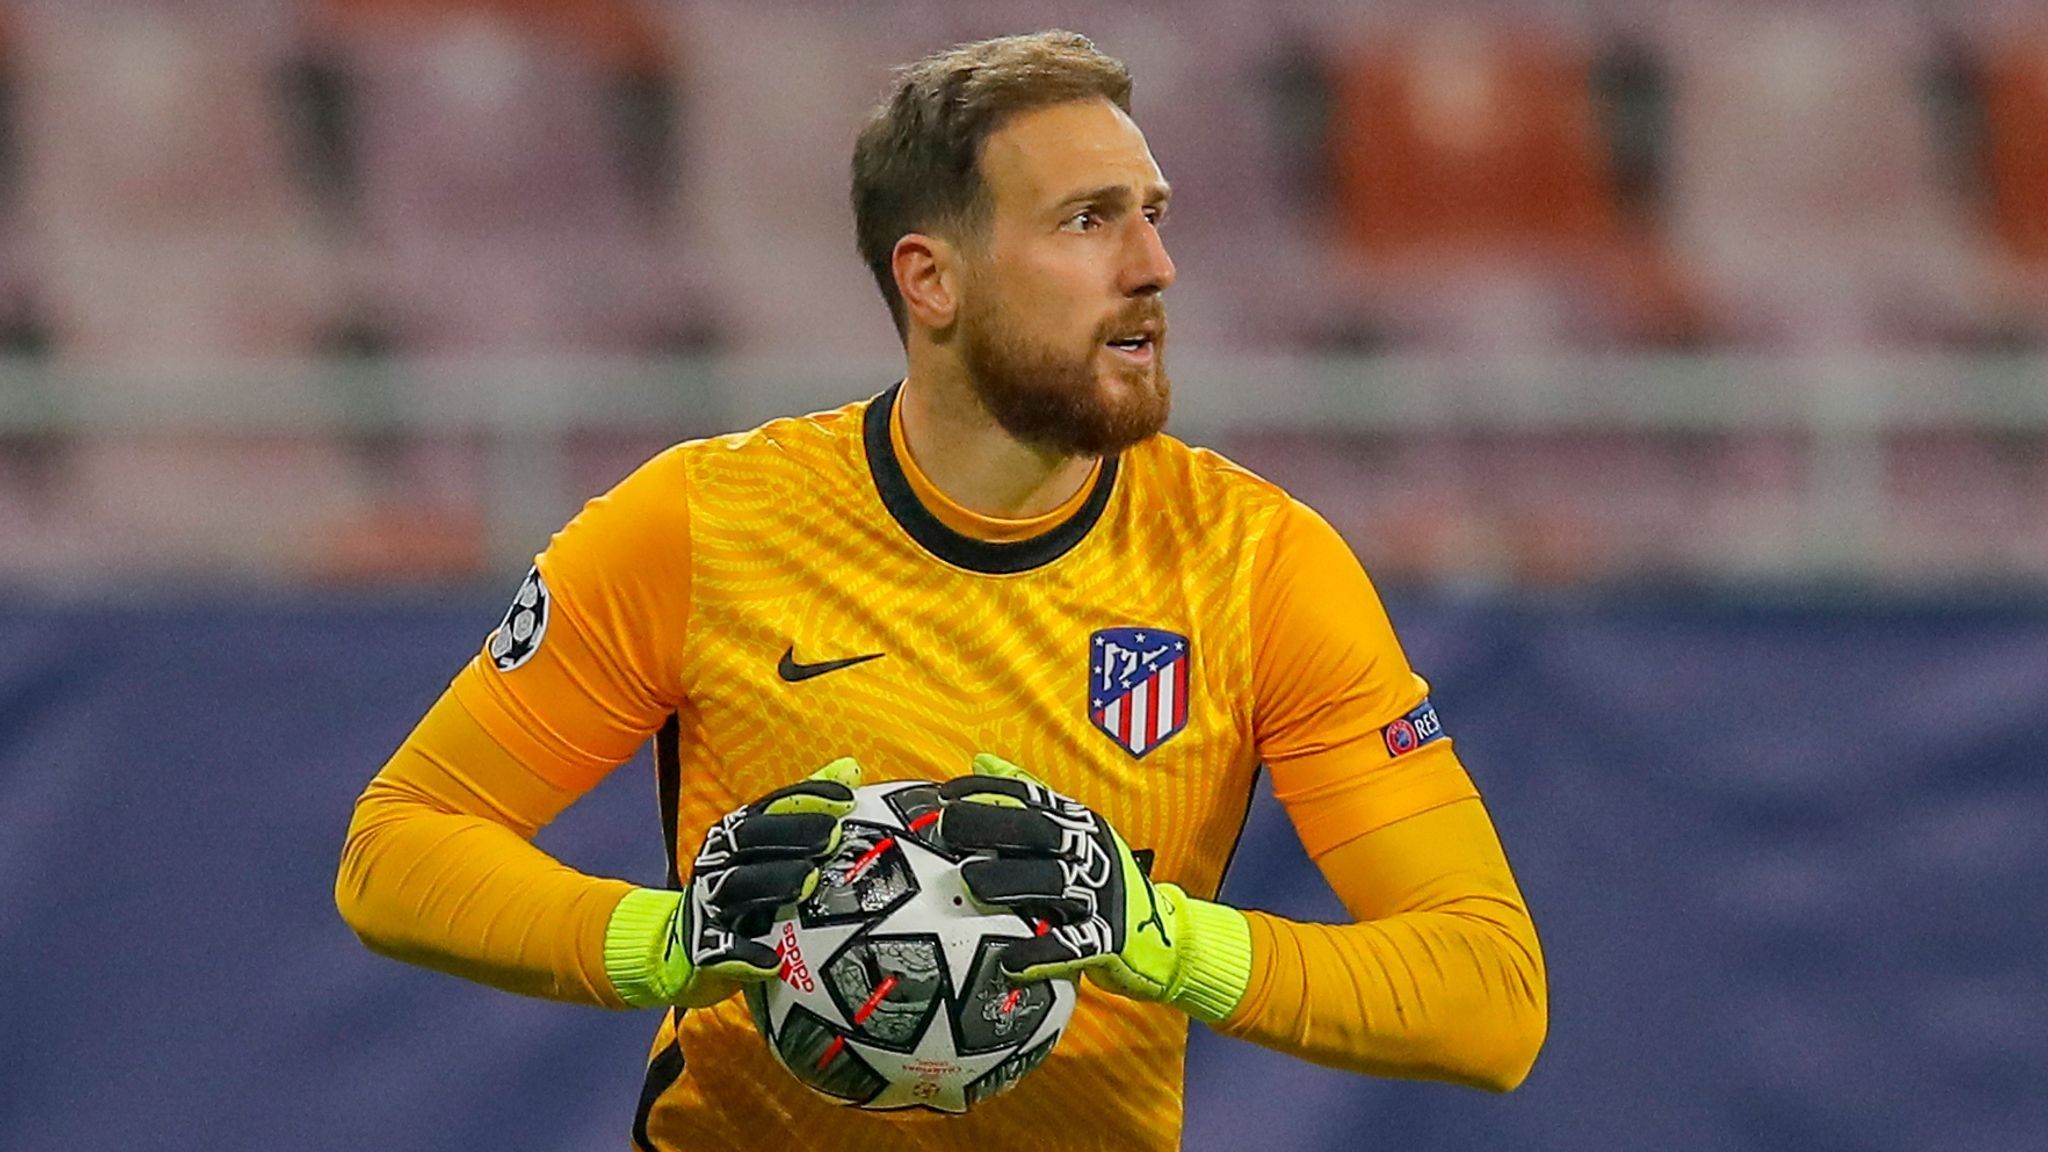 Atlético's Goalkeeper Oblak Named Best Player Of The Week In Champions League